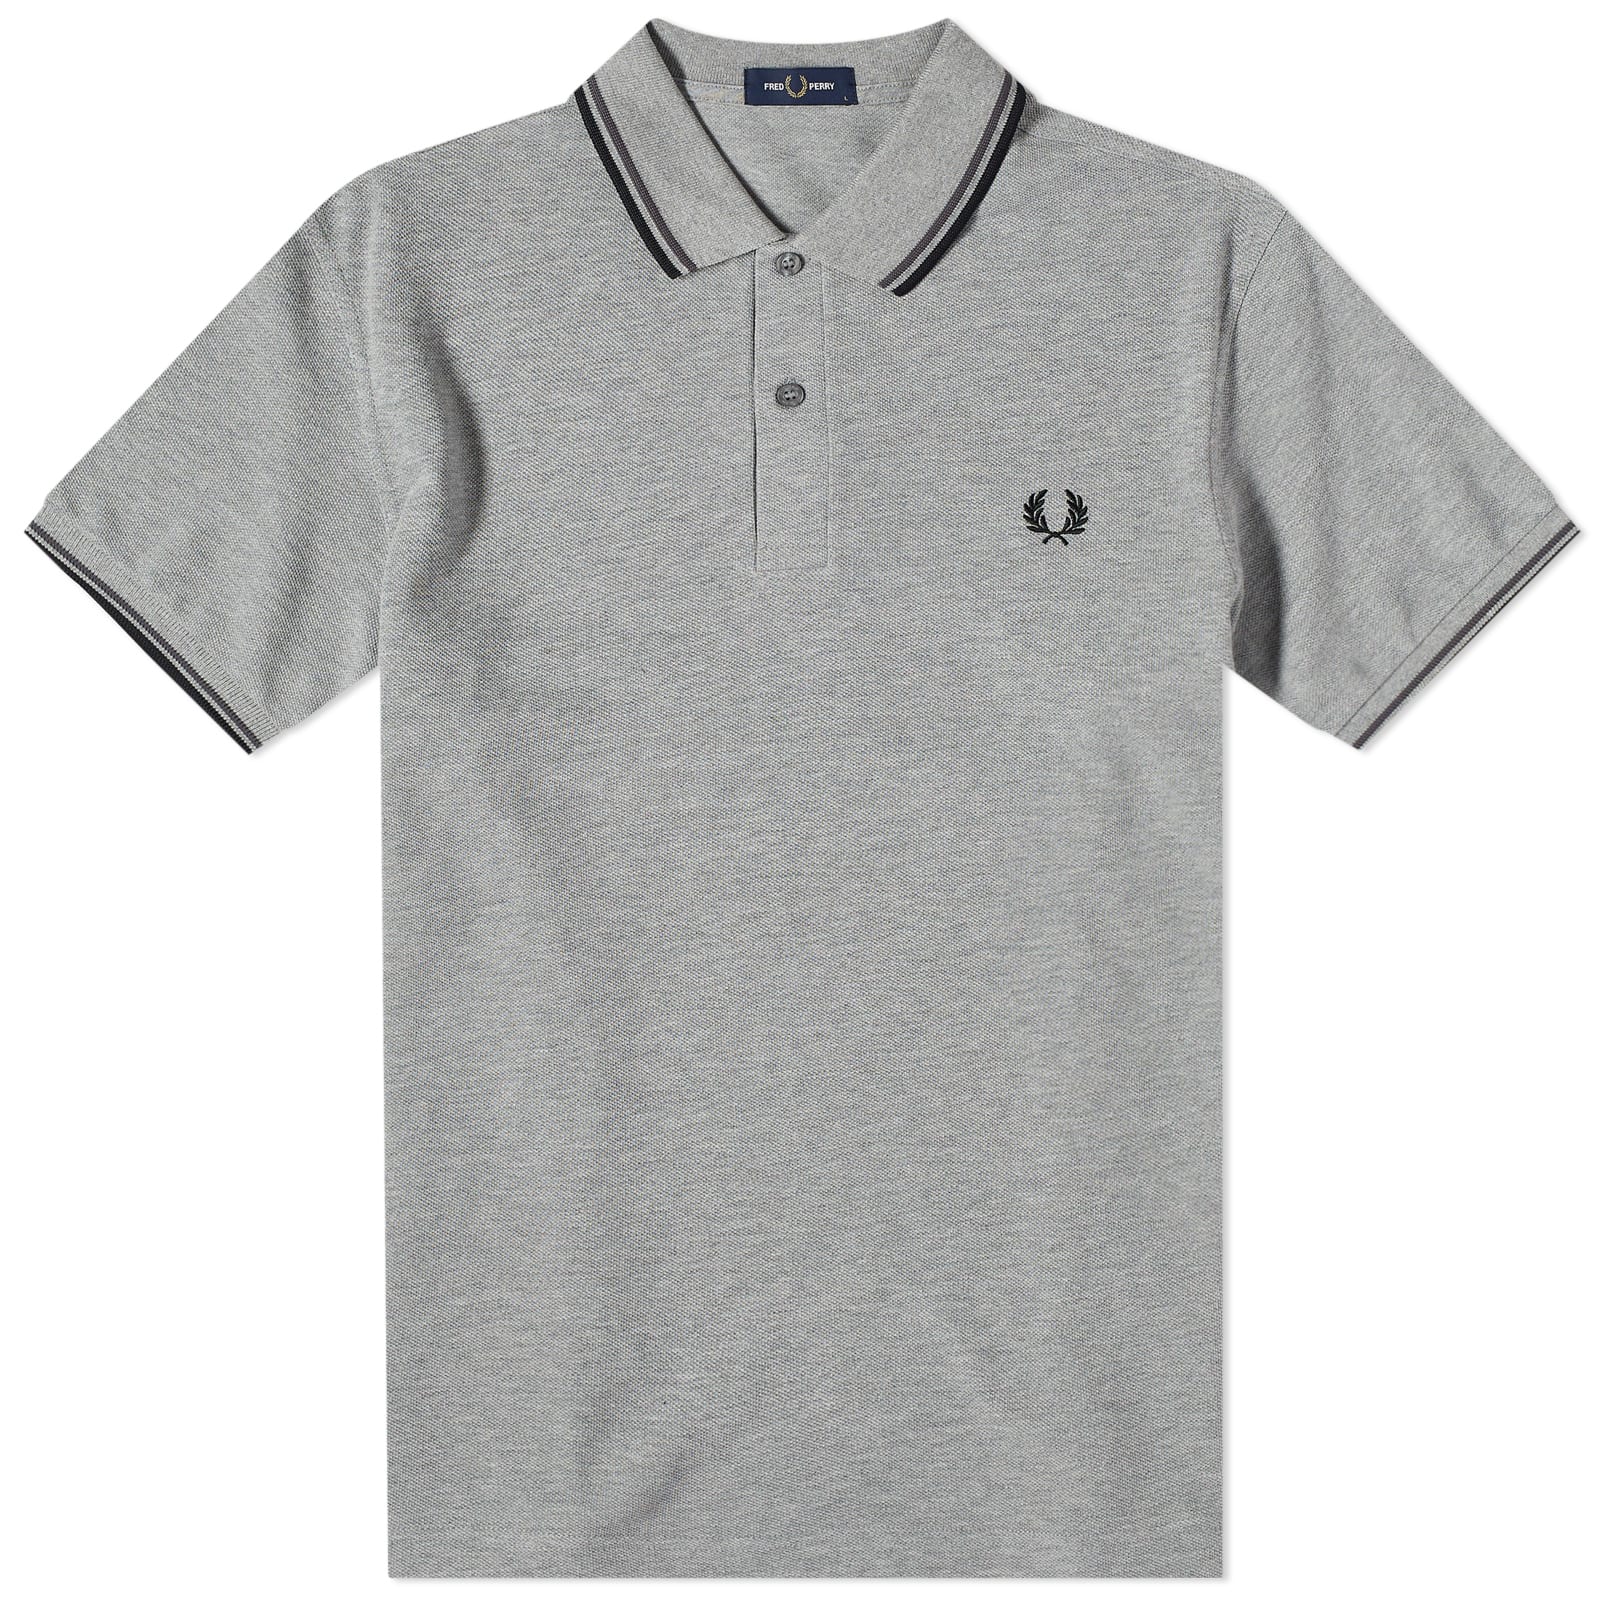 Футболка-поло Fred Perry Twin Tipped, светло-серый